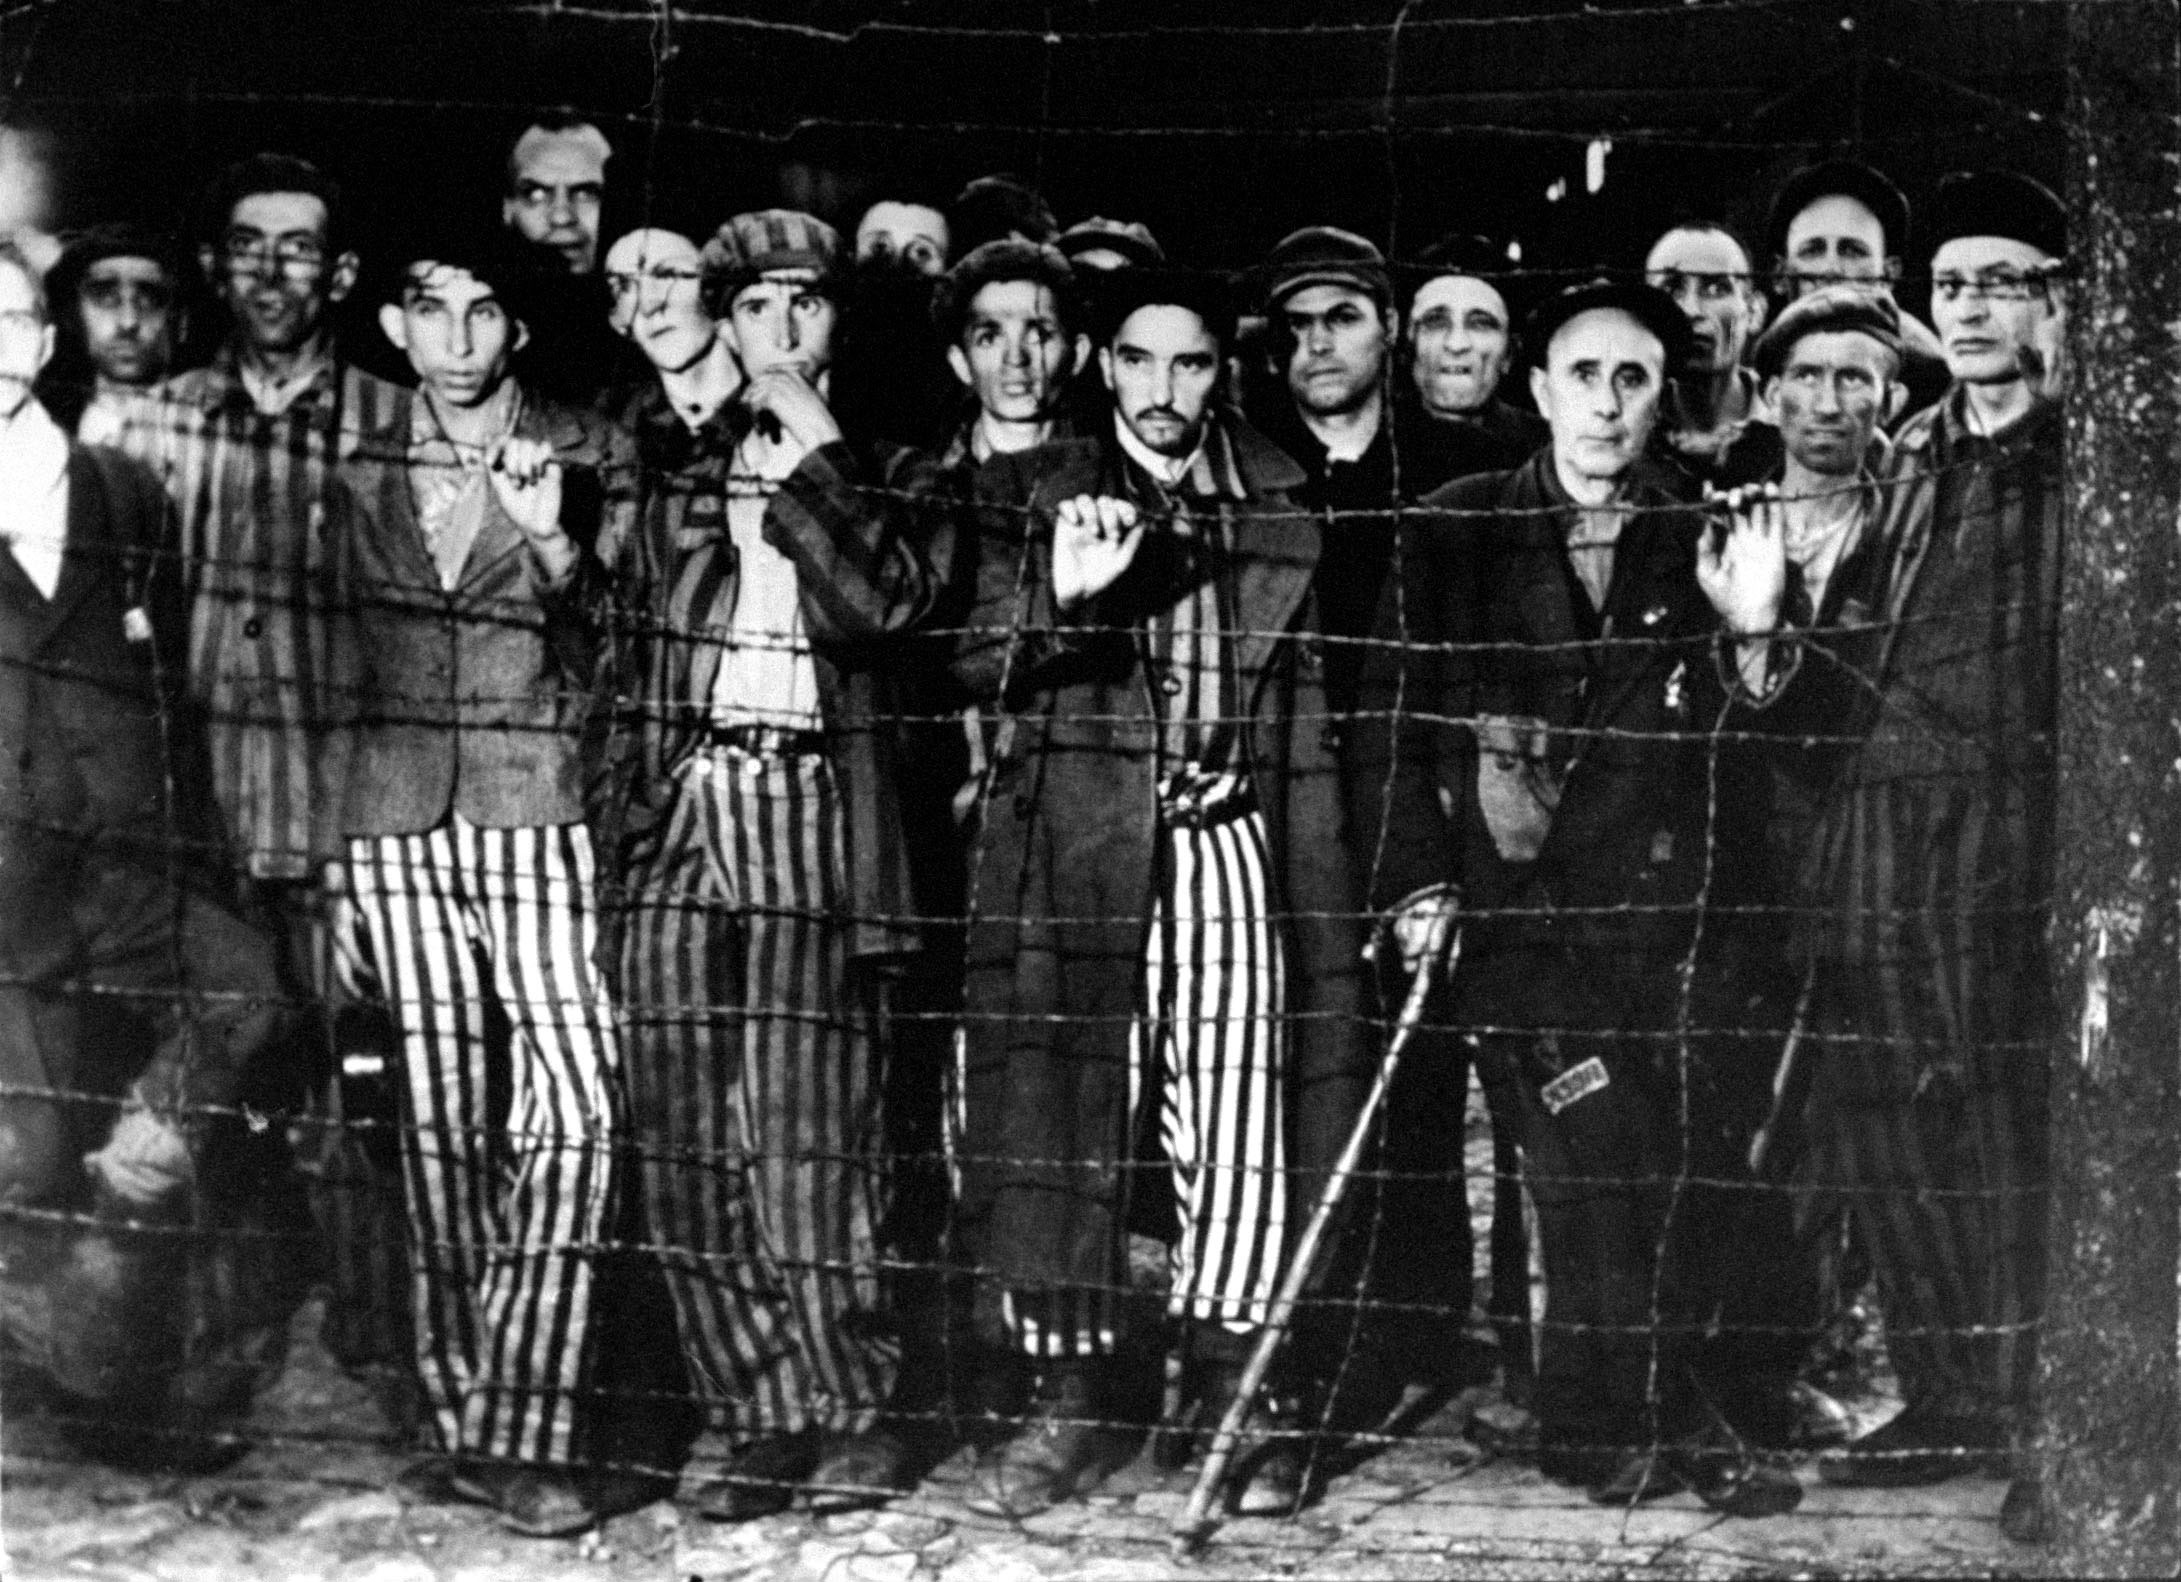 Buchenwald concentration camp prisoners stare in disbelief at their Allied liberators, April 1945.